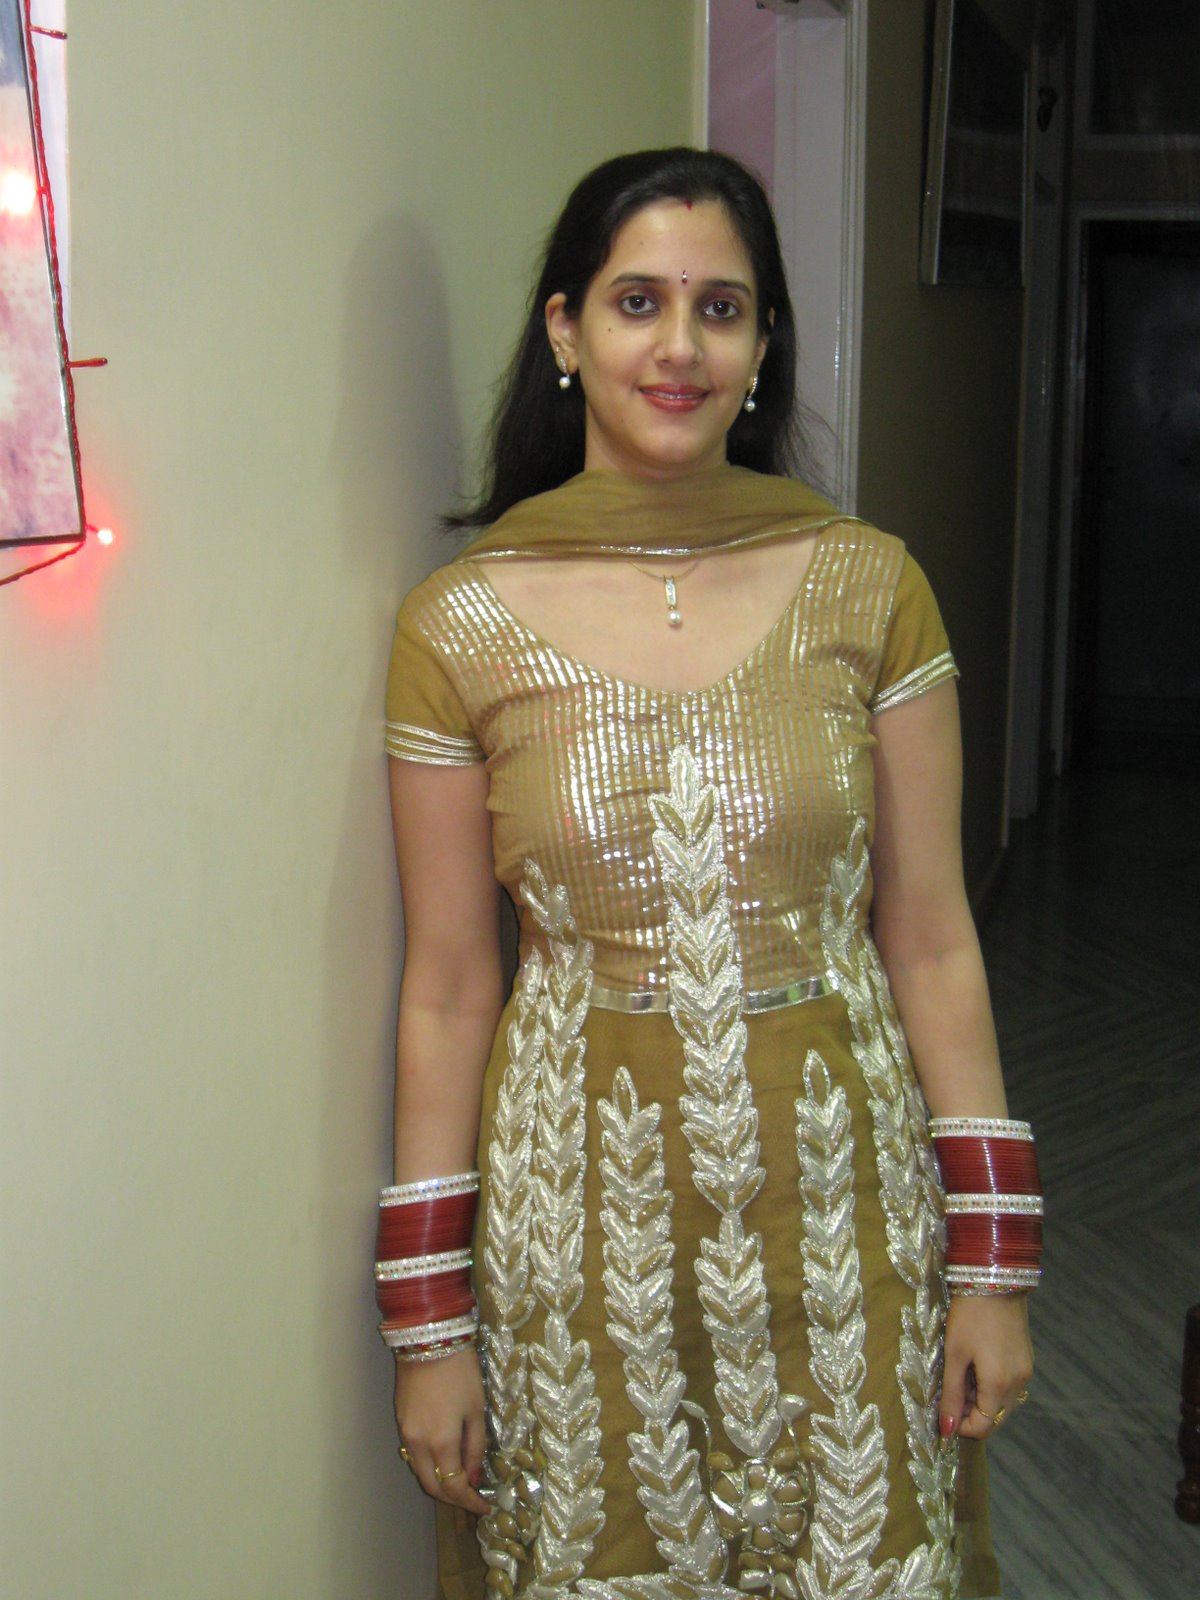 Mangalsutra clad hindu wife with